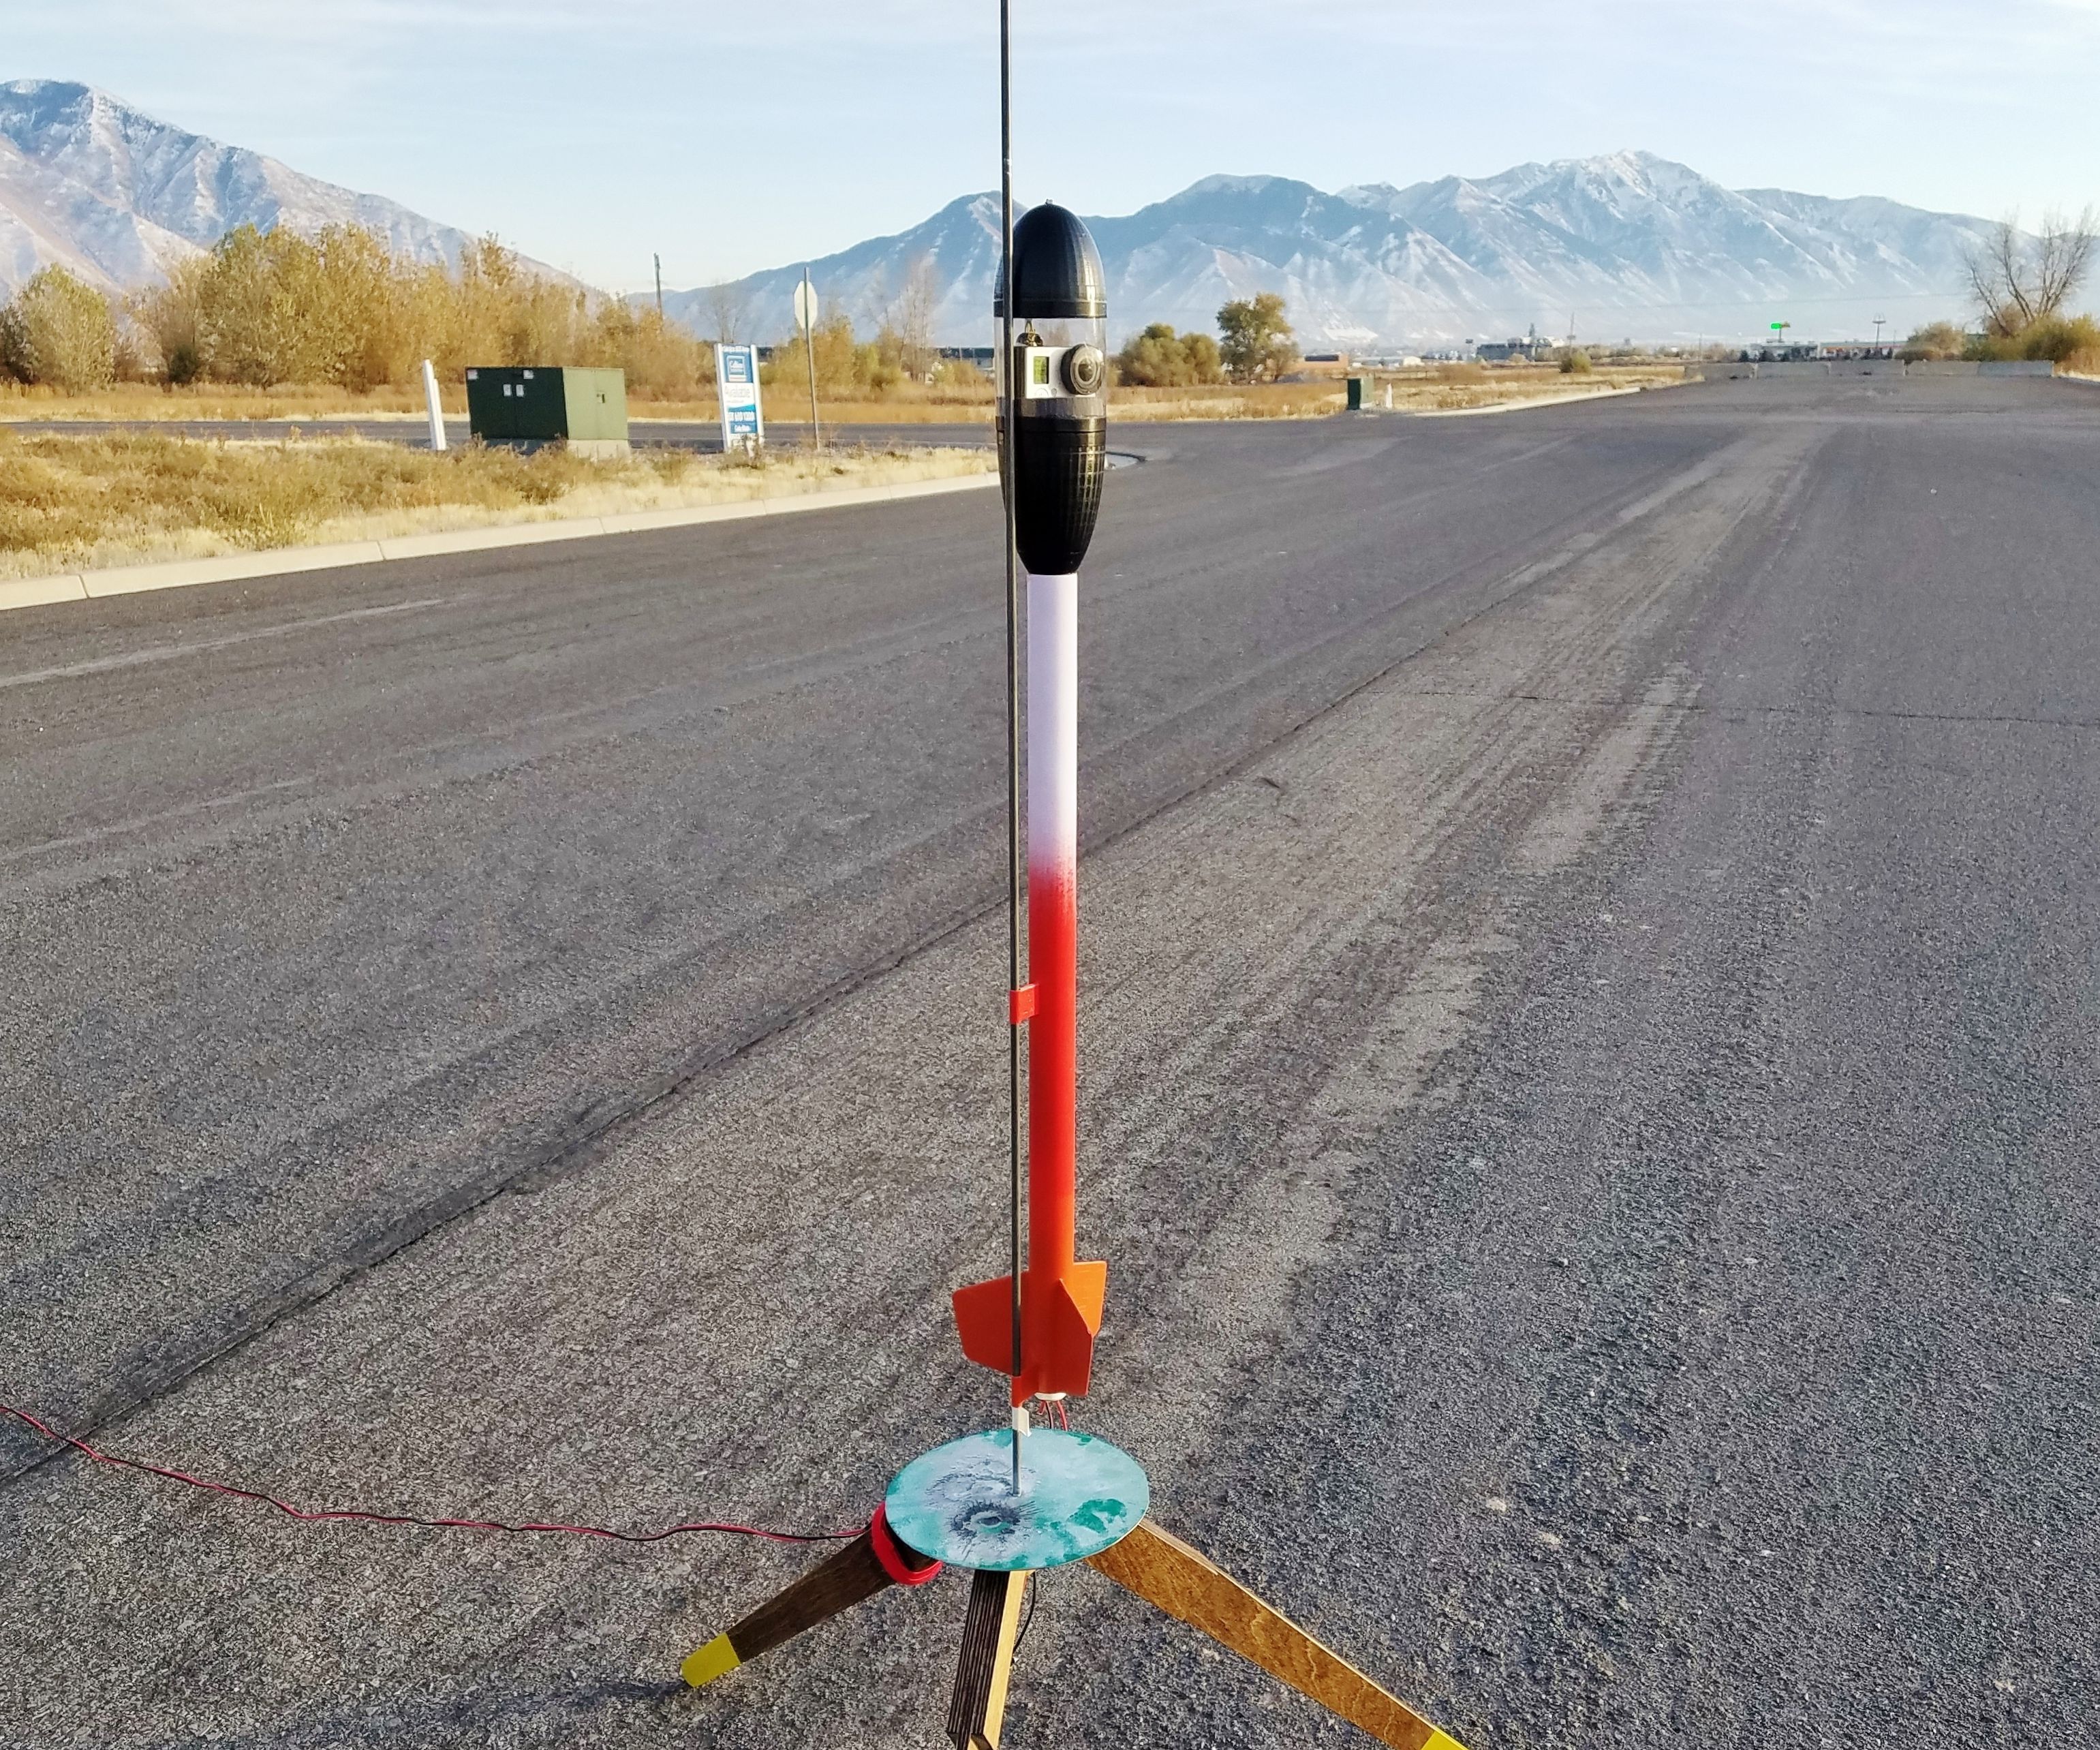 Model Rocket With GoPro Nose Cone